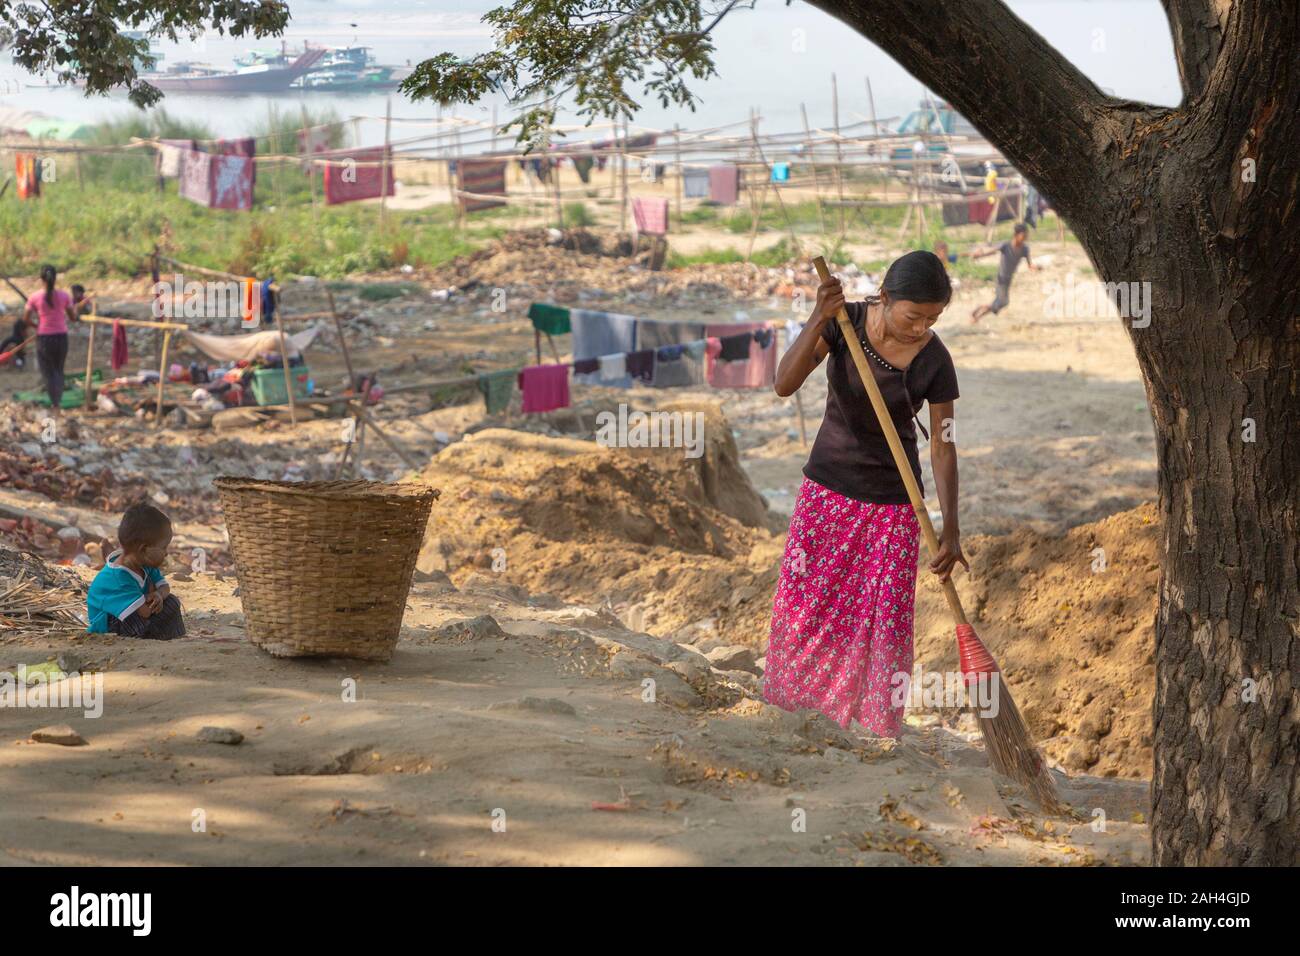 Local woman sweeping in the settlement near the River Irrawaddy, in Mandalay, Myanmar Stock Photo